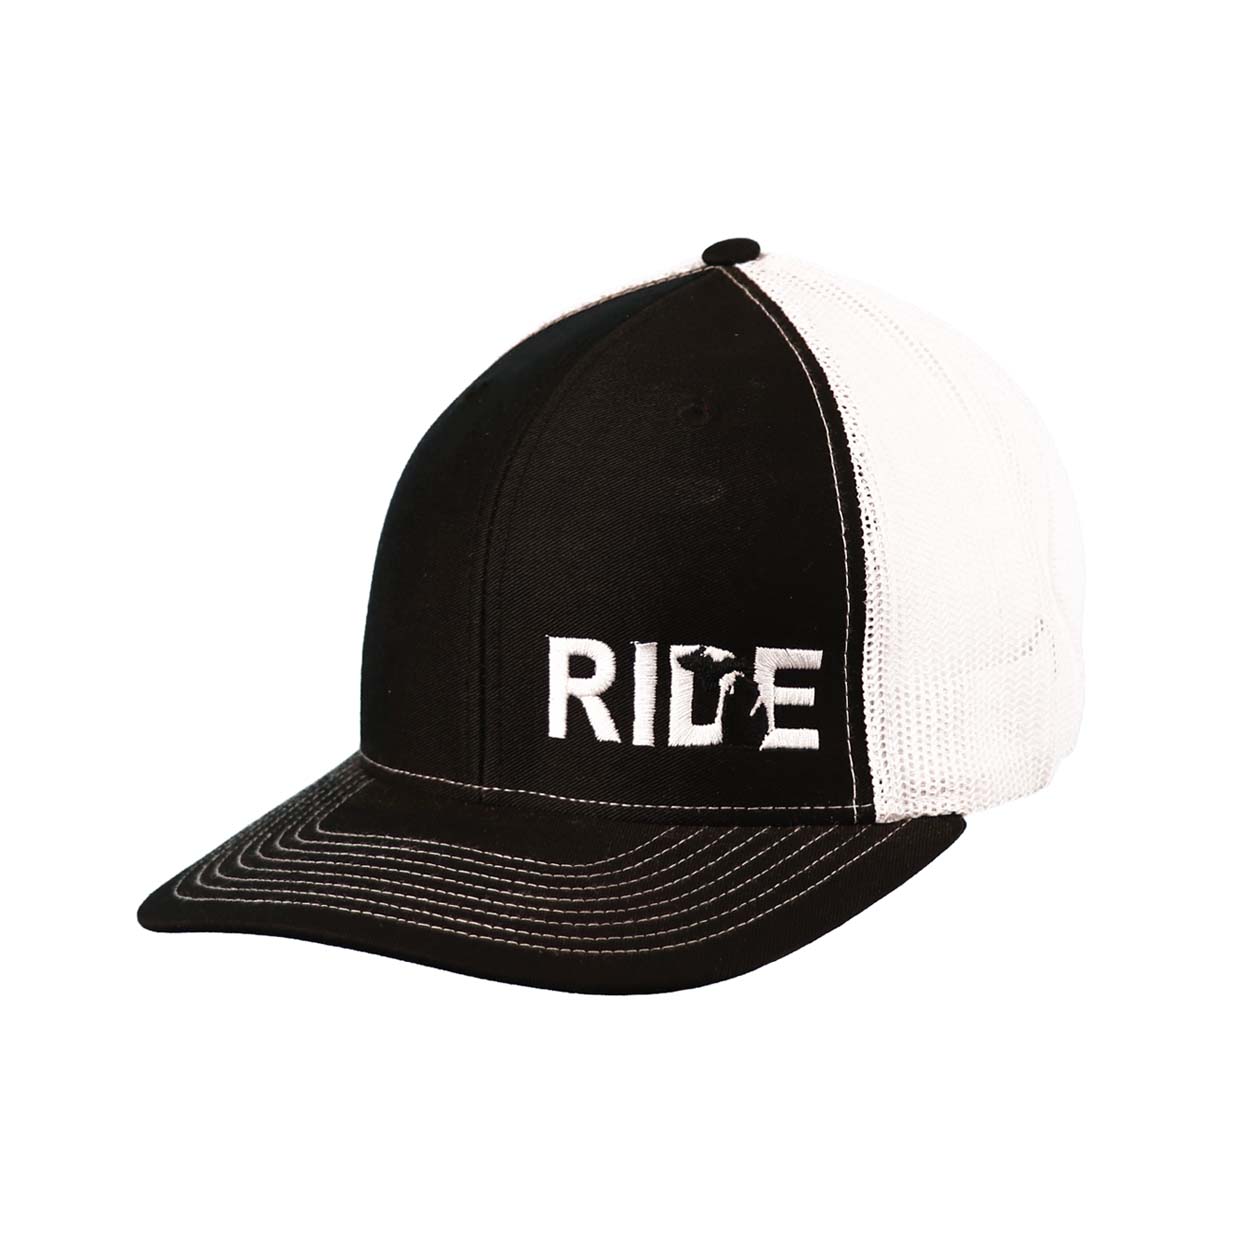 Ride Michigan Classic Pro Night Out Embroidered Snapback Trucker Hat Black/White